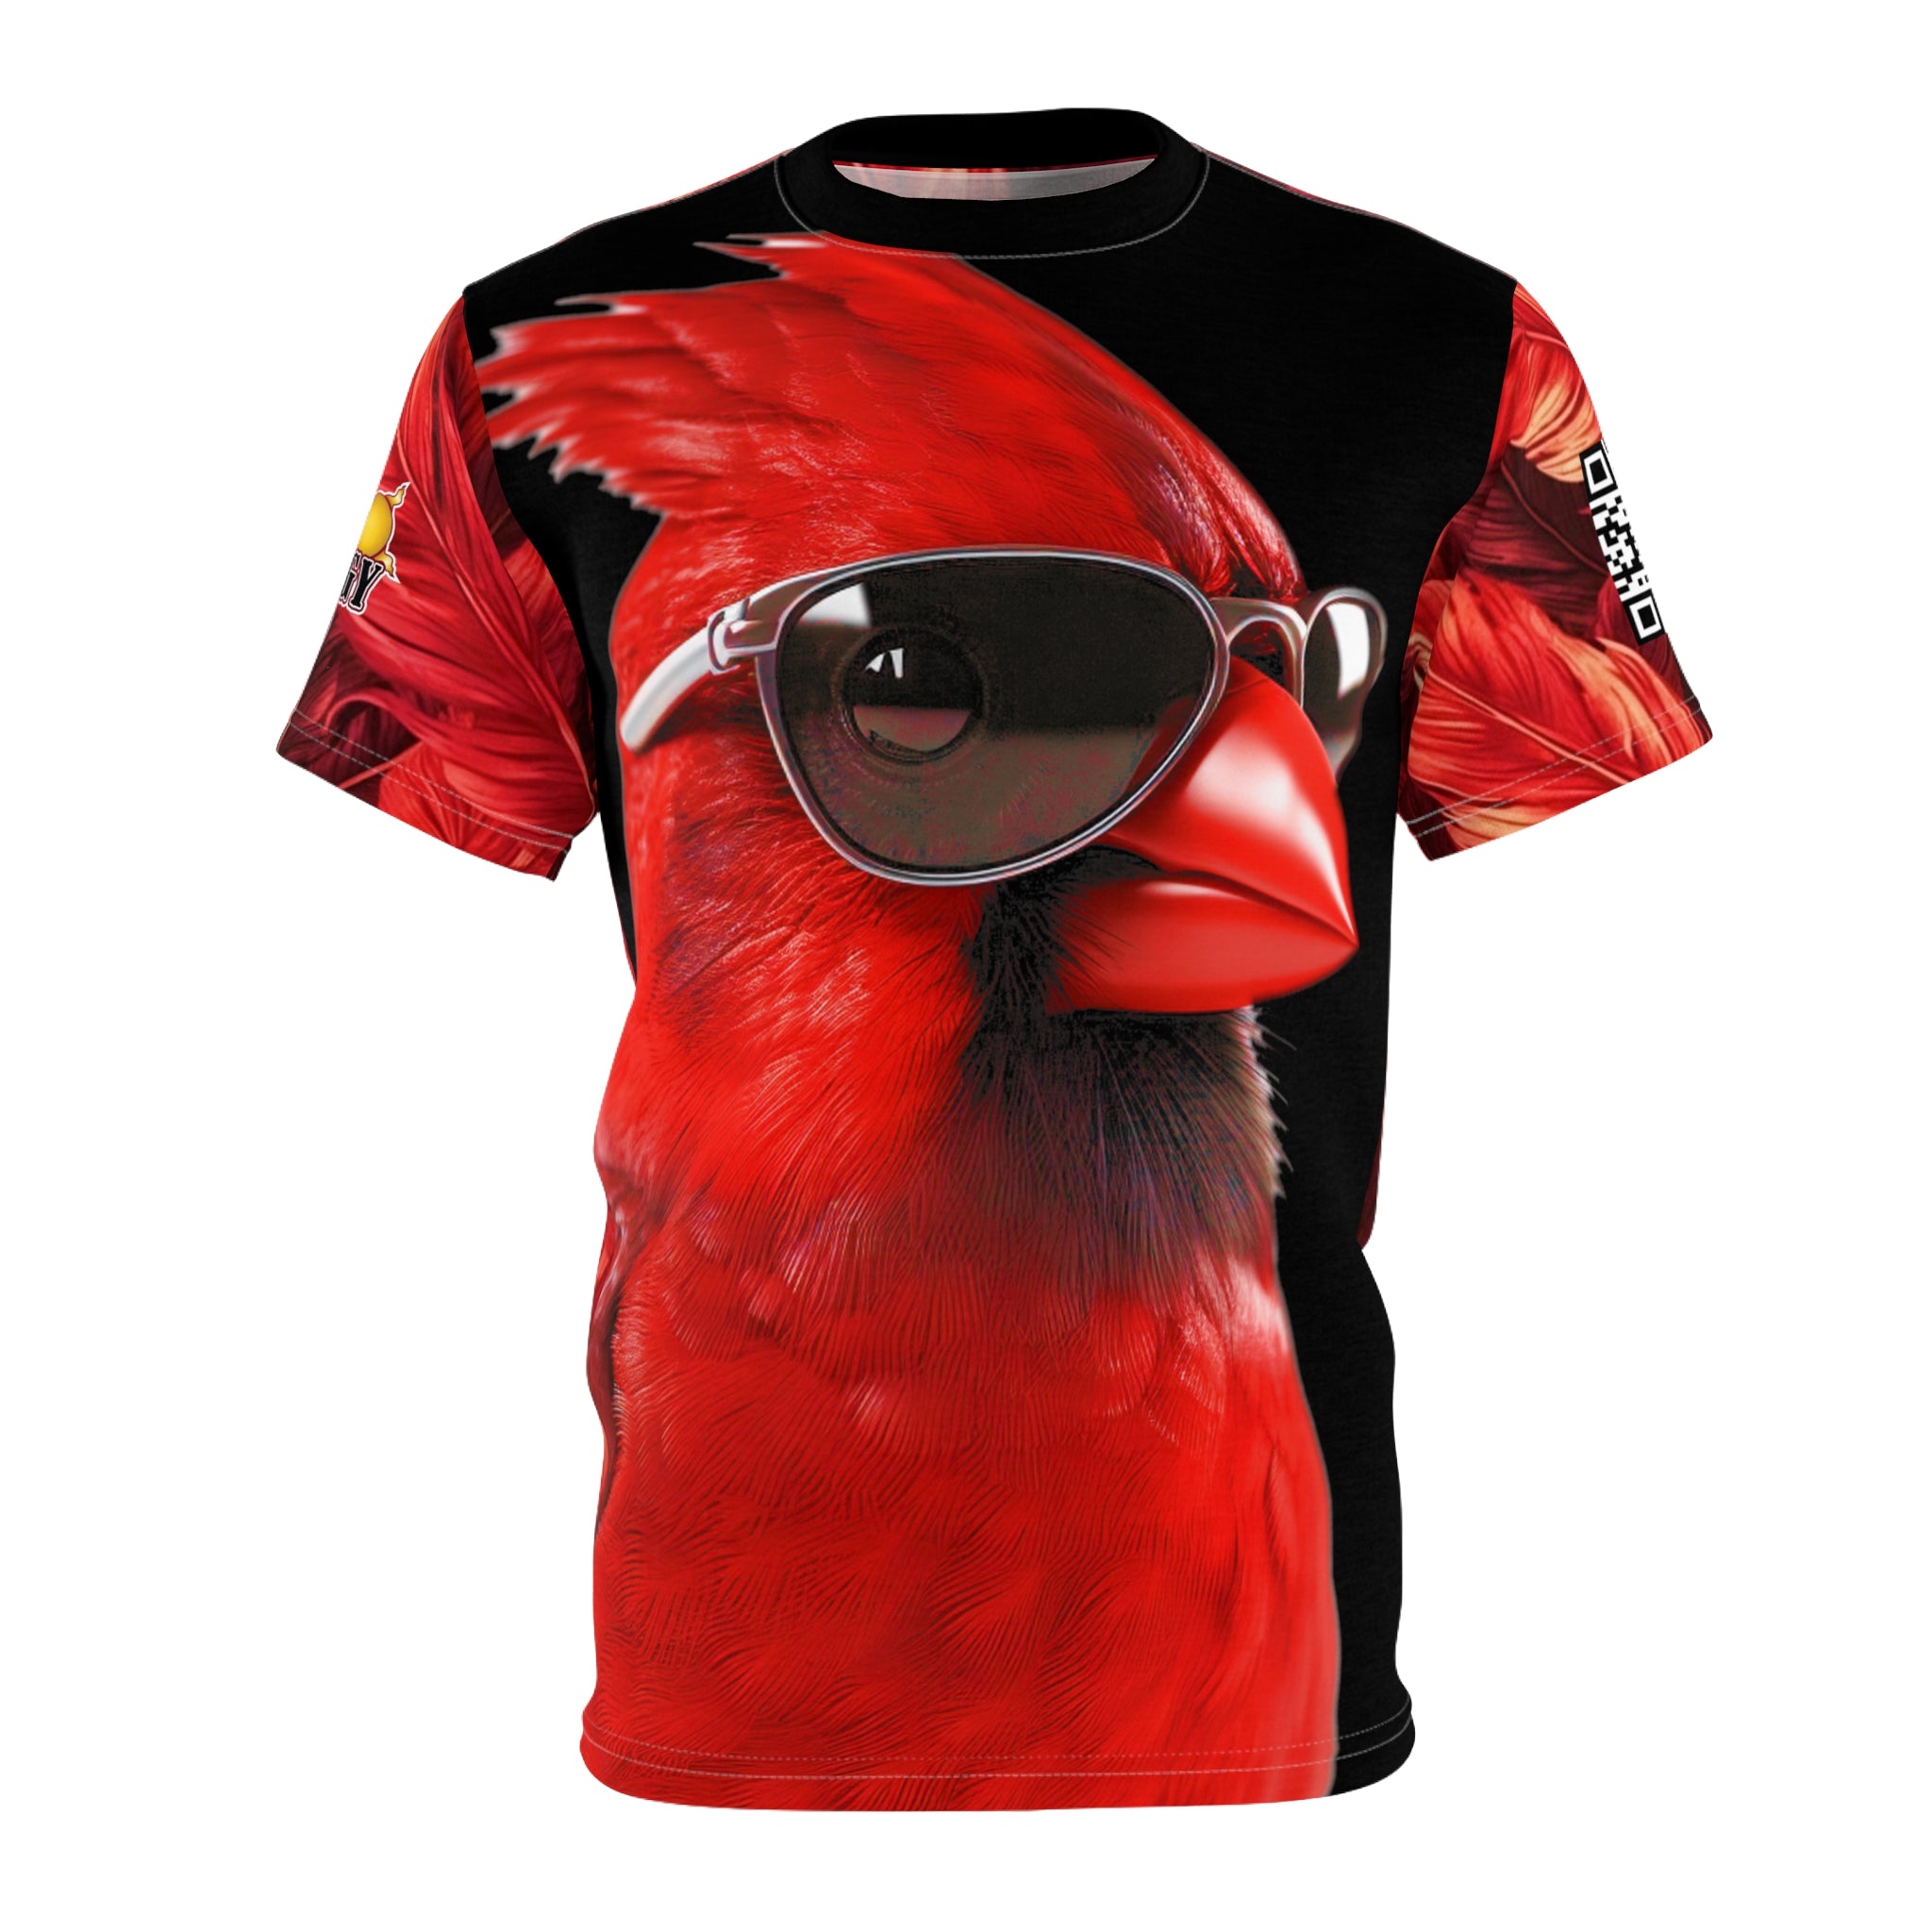 Unisex The cool Cardinal (master)